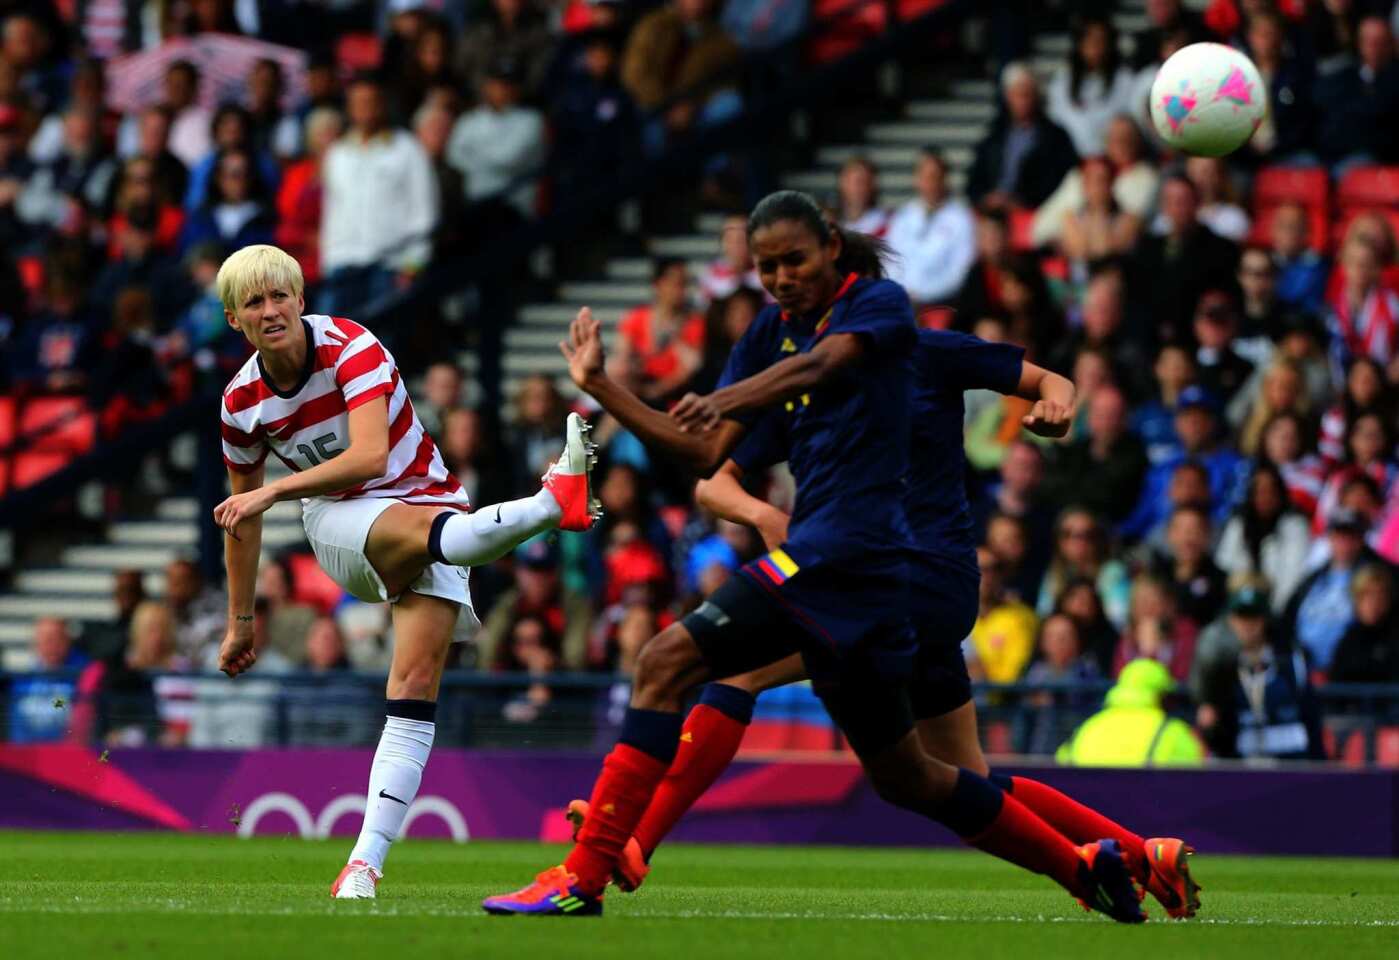 U.S. midfielder Megan Rapinoe, left, scores the opening goal against Colombia during the women's soccer first round Group G match of the London 2012 Olympics at Hampden Park.